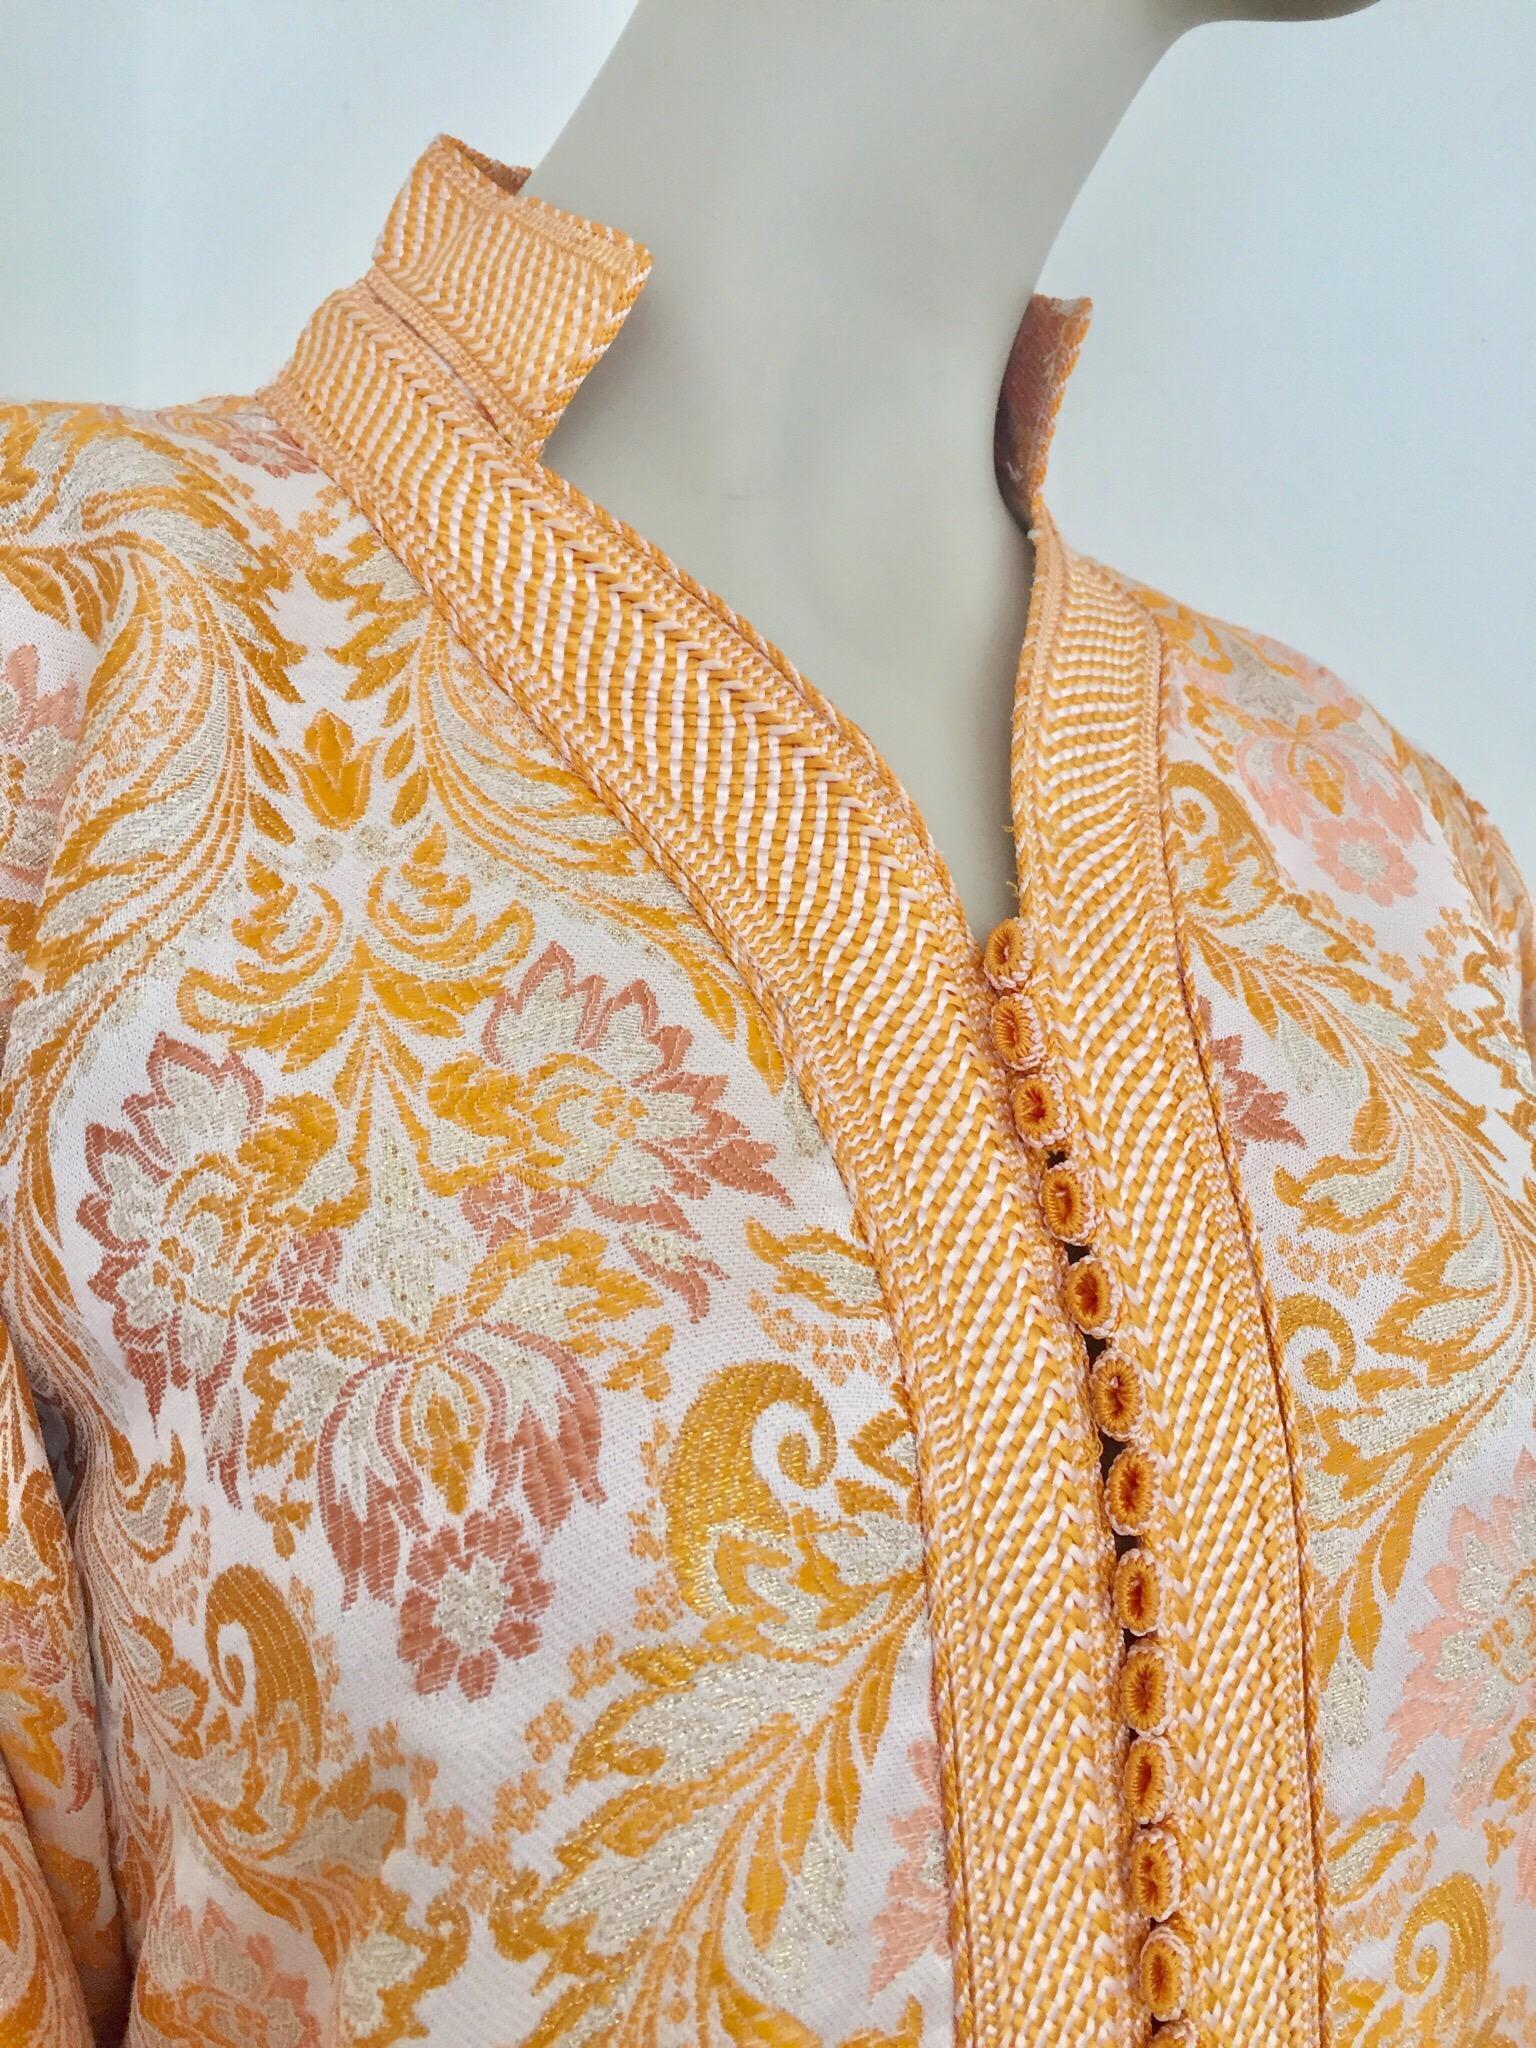 Moroccan caftan in gold damask brocade maxi dress kaftan handmade by Moroccan Artist.
Handcrafted vintage exotic 1970s gold and orange brocade ceremonial caftan gown from North Africa, Morocco.
The luminous brocade fabric shimmers with all-over